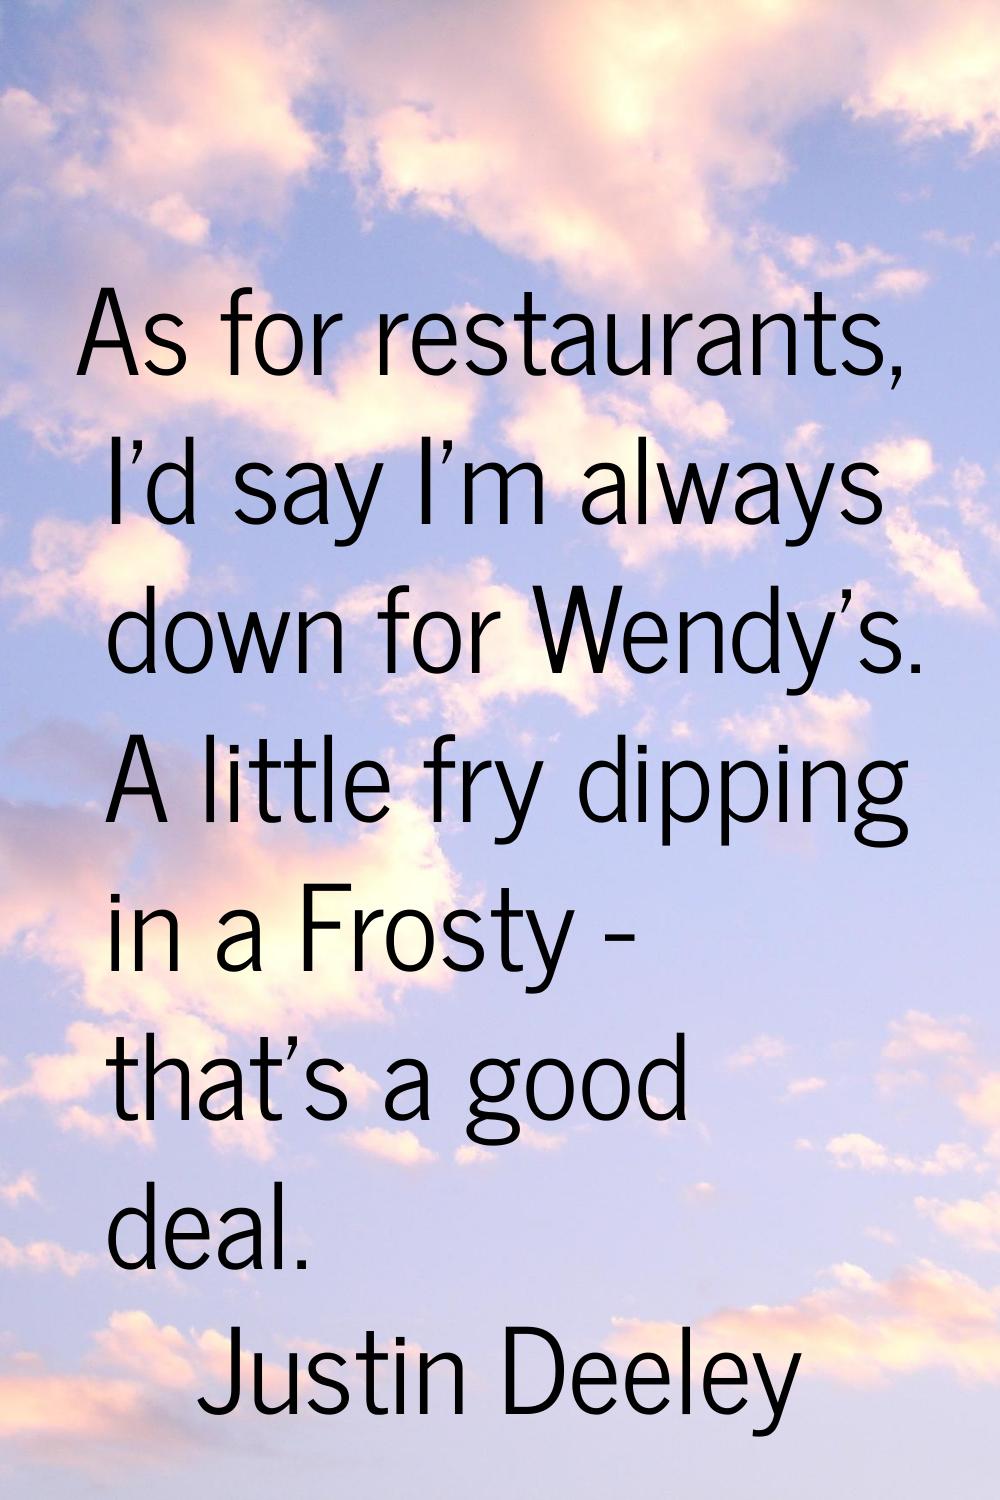 As for restaurants, I'd say I'm always down for Wendy's. A little fry dipping in a Frosty - that's 